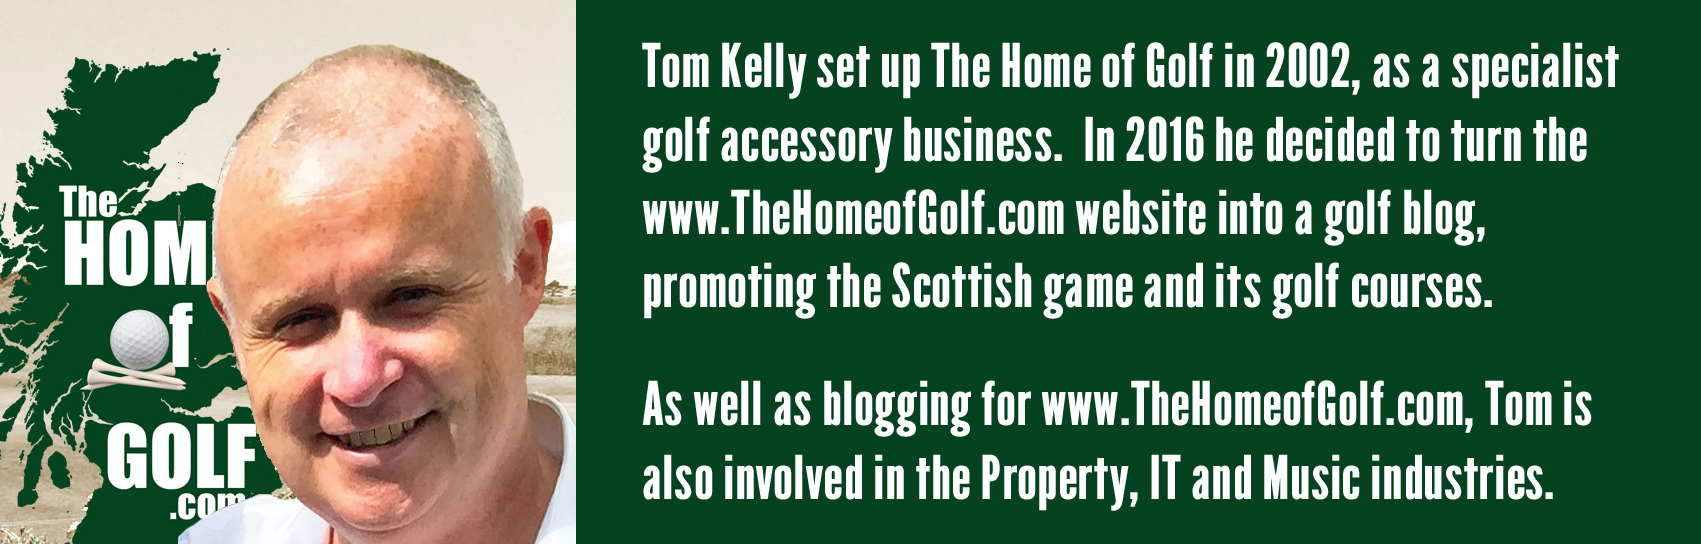 Tom Kelly the home of golf